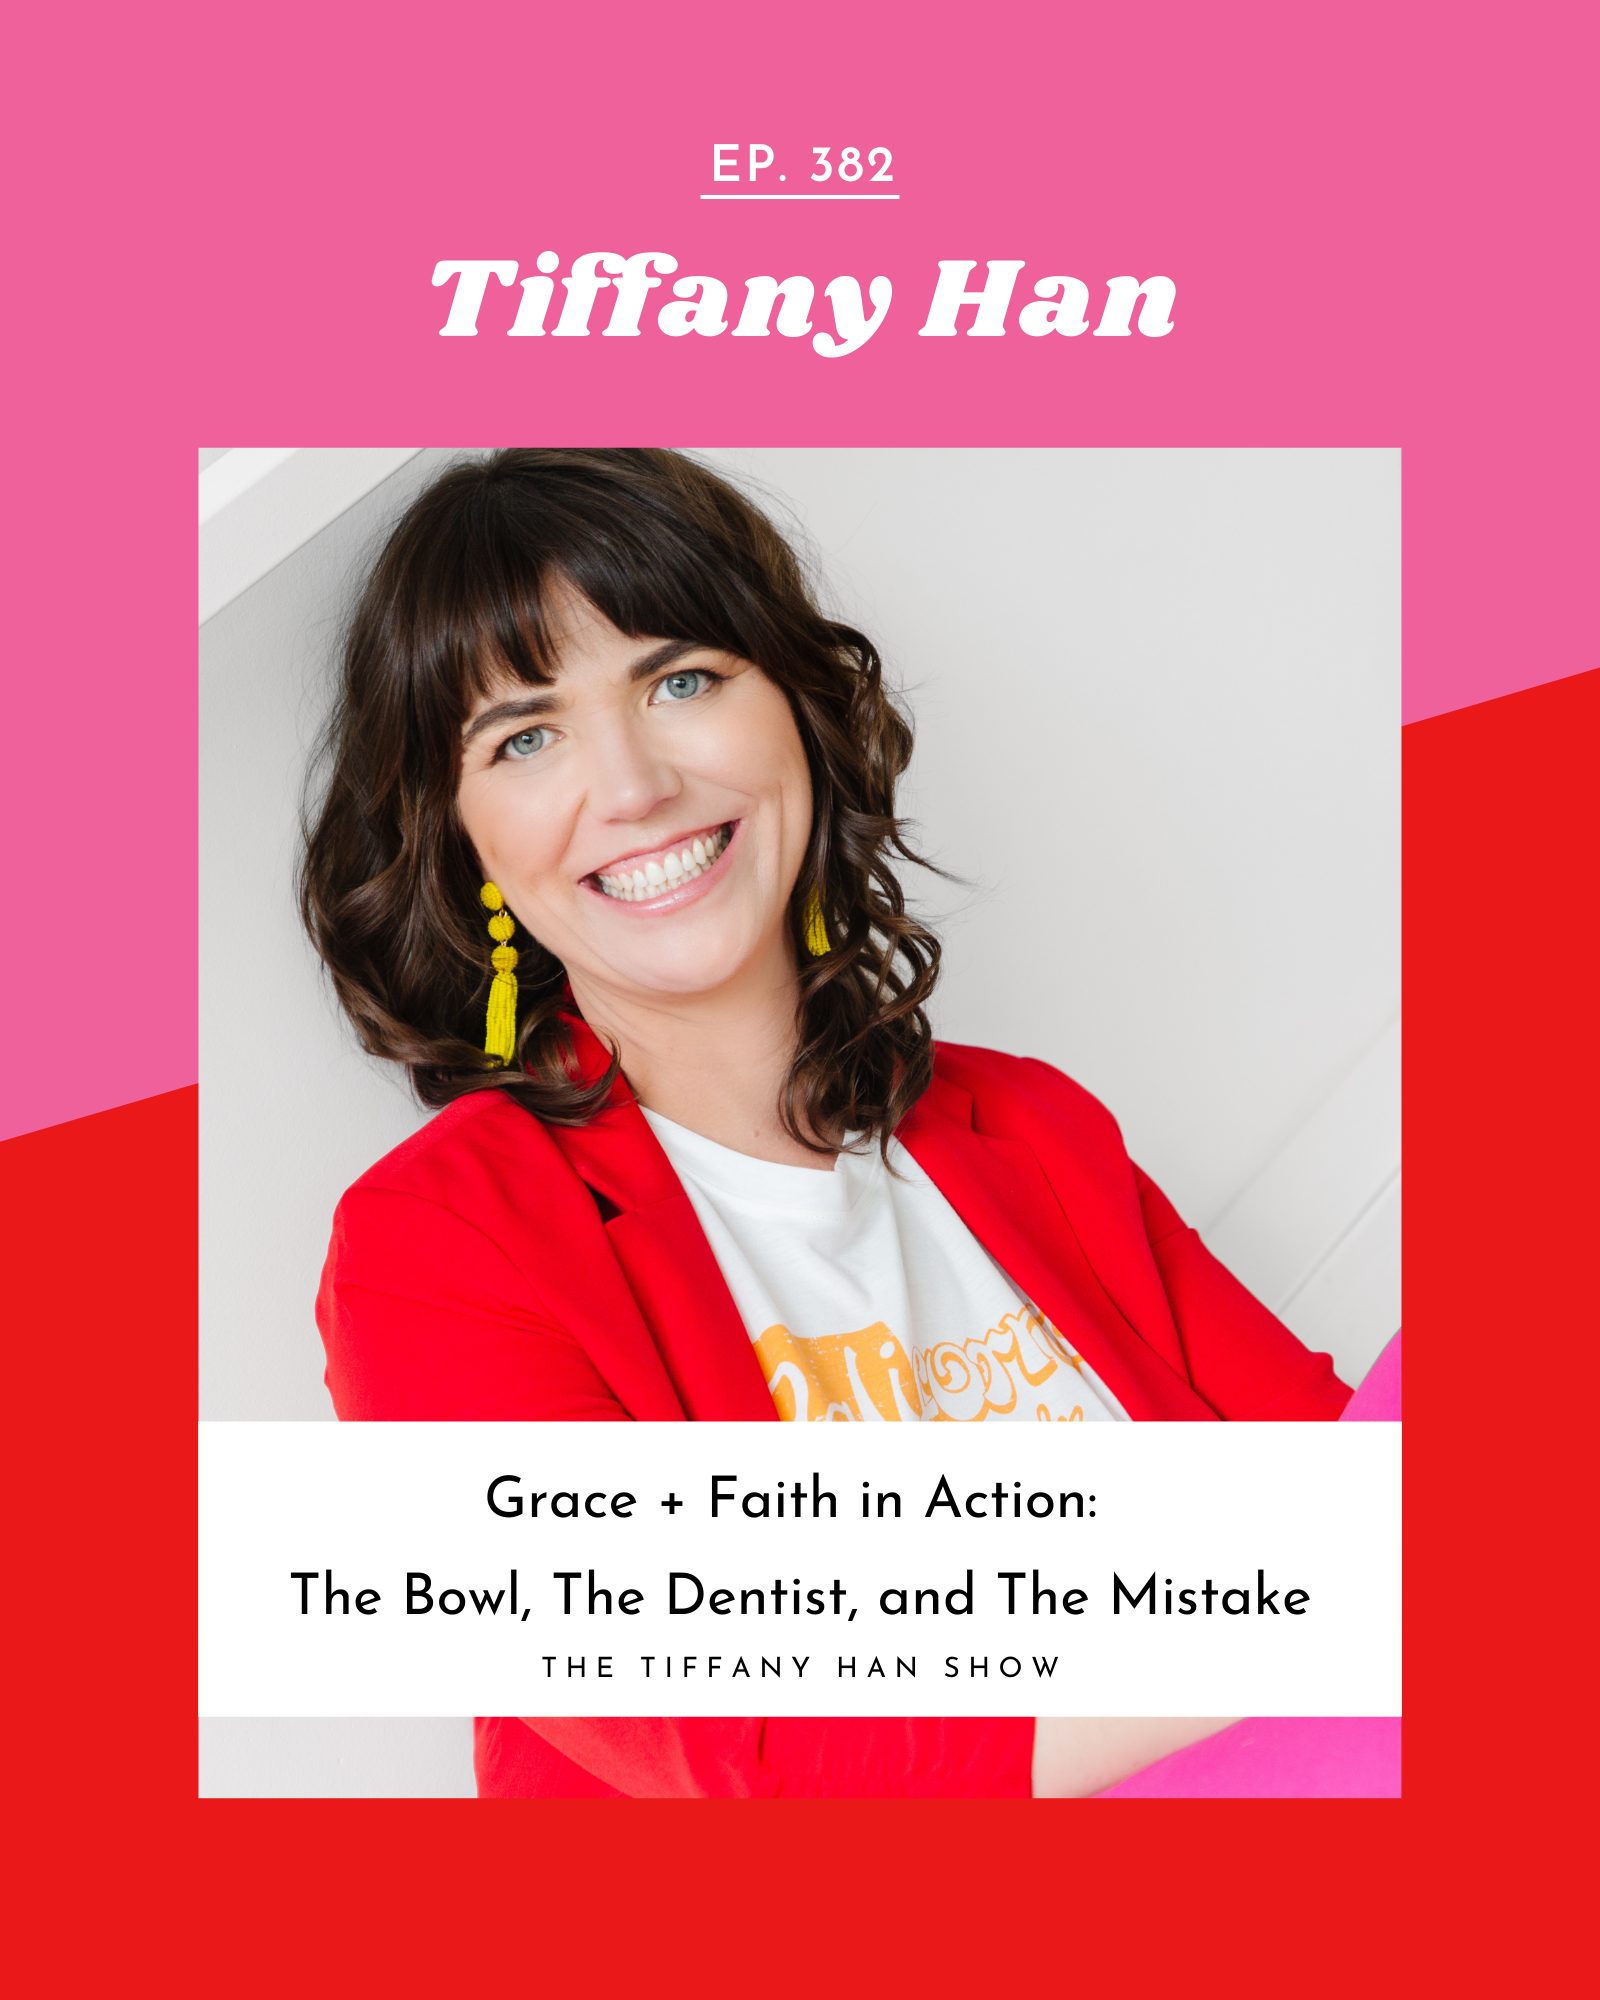 Grace + Faith in Action: The Bowl, The Dentist, and The Mistake